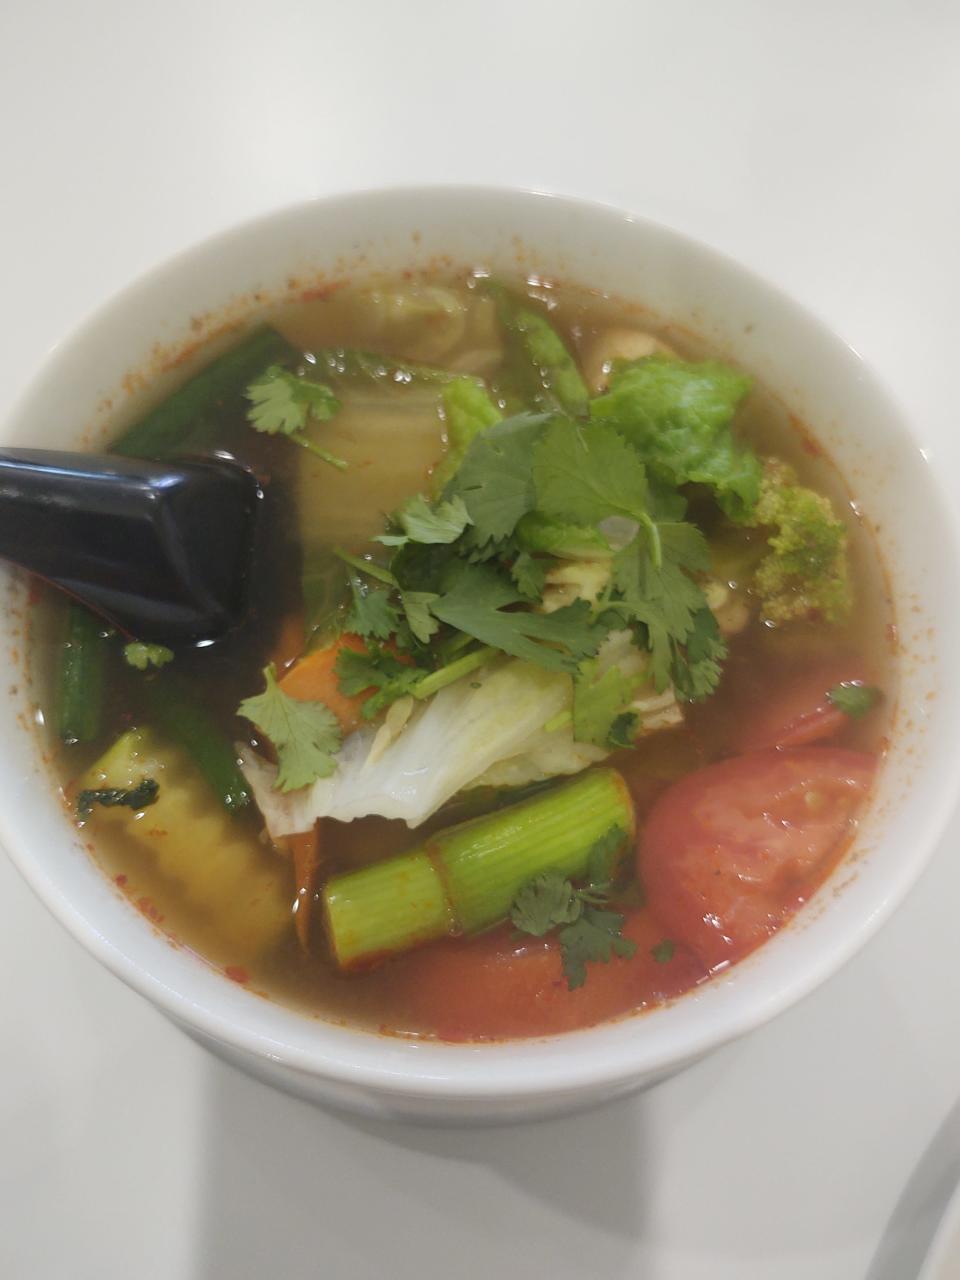 At JaneJira in Vero Beach, the light and tasty hot and sour lemongrass soup infused with many Thai herbs just might be the perfect answer when the common cold has a person feeling under the weather.